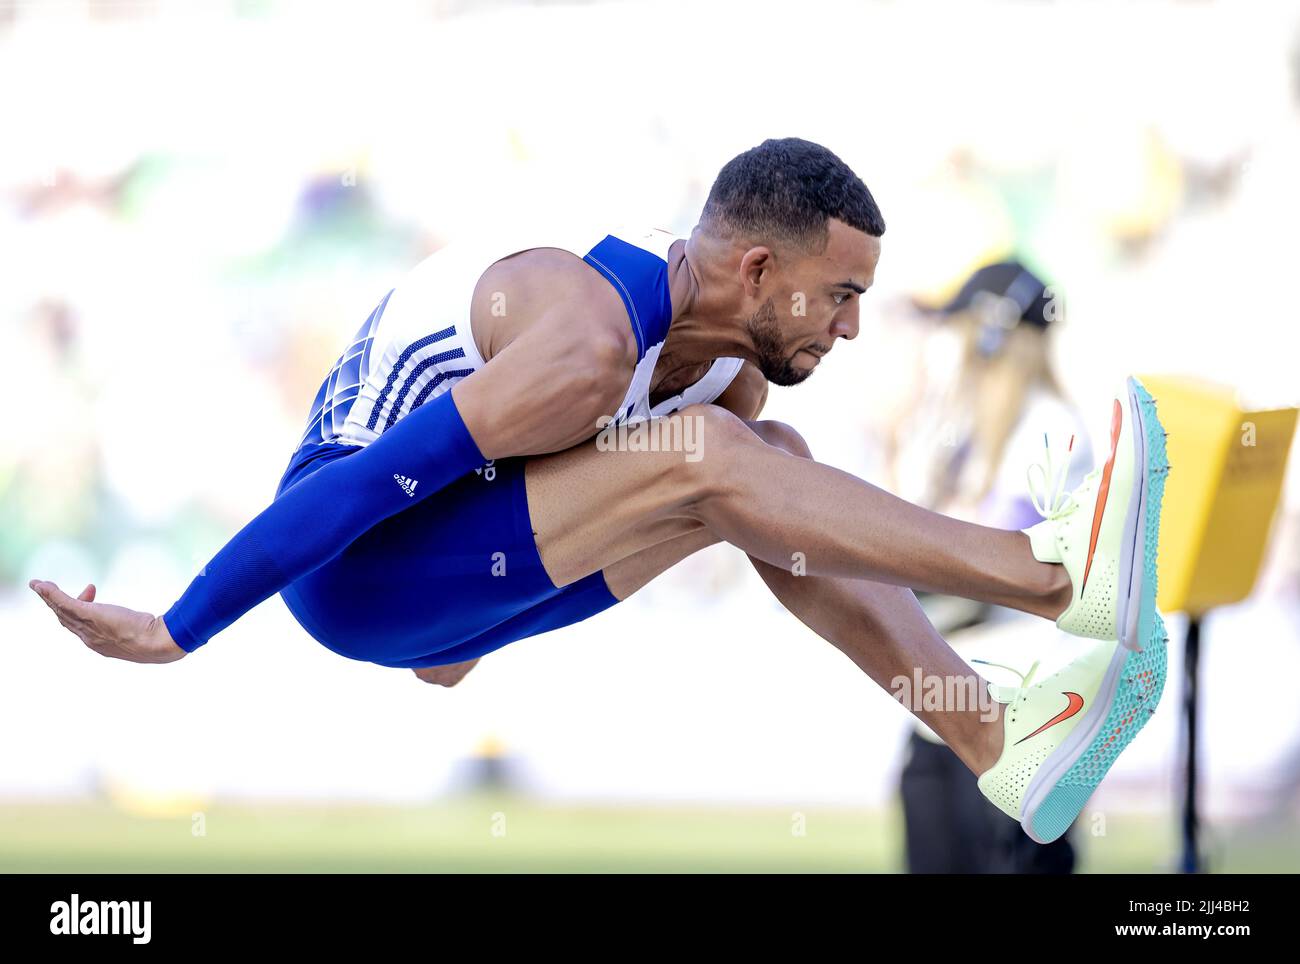 Oregon, USA. 23rd July, 2022. 2022-07-22 03:43:38 EUGENE - Benjamin Compaore (FRA) in action during the triple jump qualifying session of the seventh day of the World Athletics Championships at Hayward Field stadium. ANP ROBIN VAN LONKHUIJSEN netherlands out - belgium out Credit: ANP/Alamy Live News Stock Photo